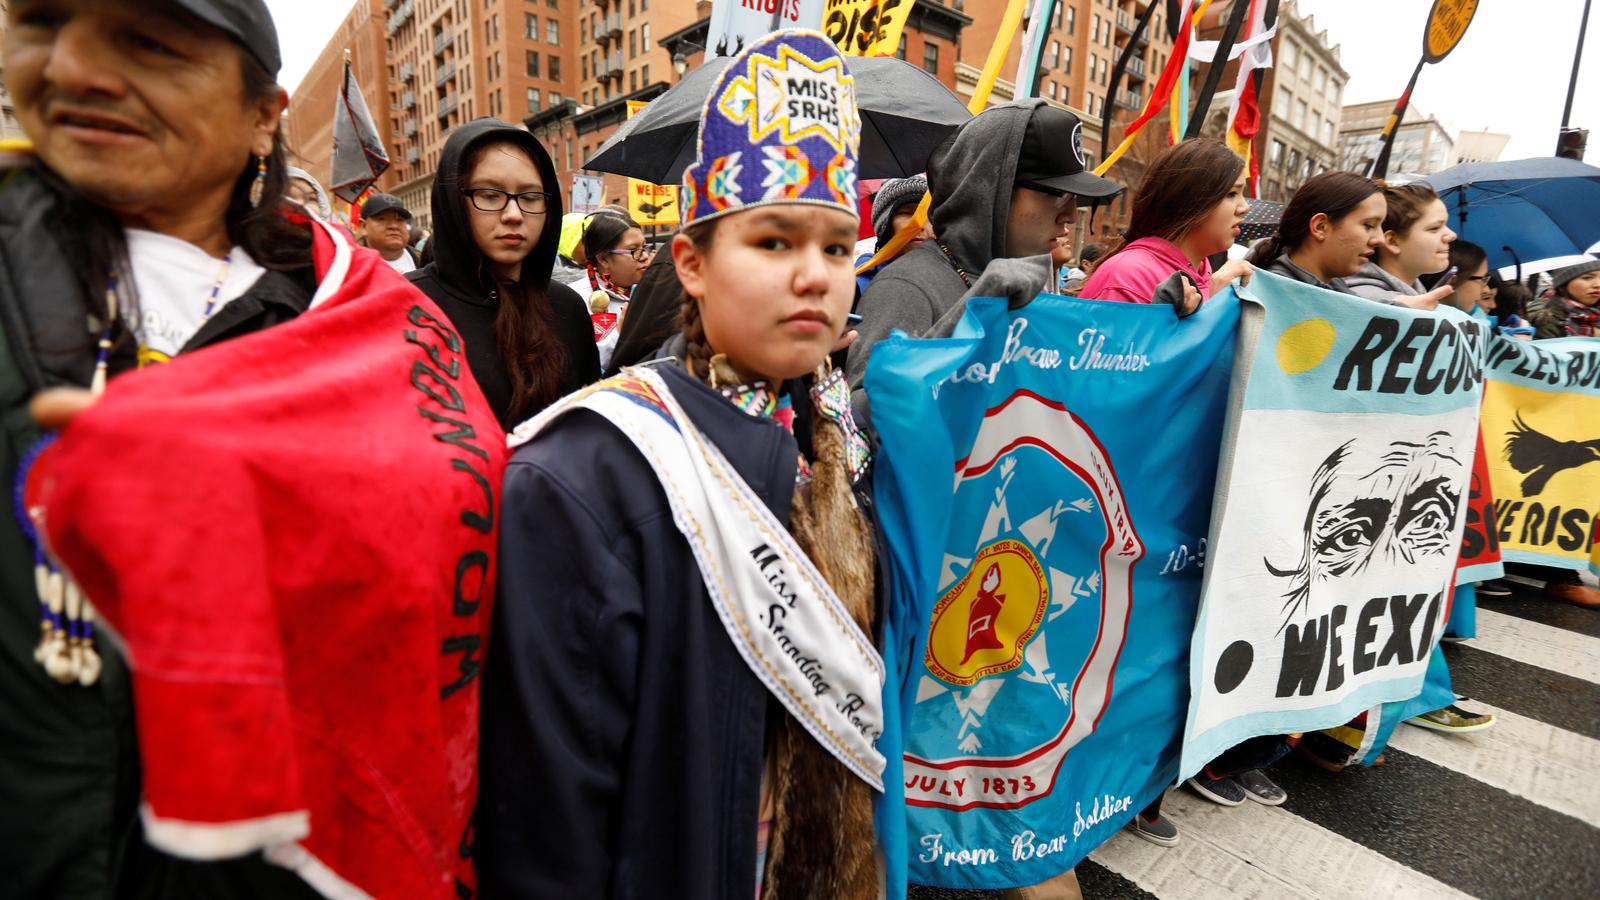 A young woman wearing a purple headdress marches in a rally with Standing Rock Sioux Nation